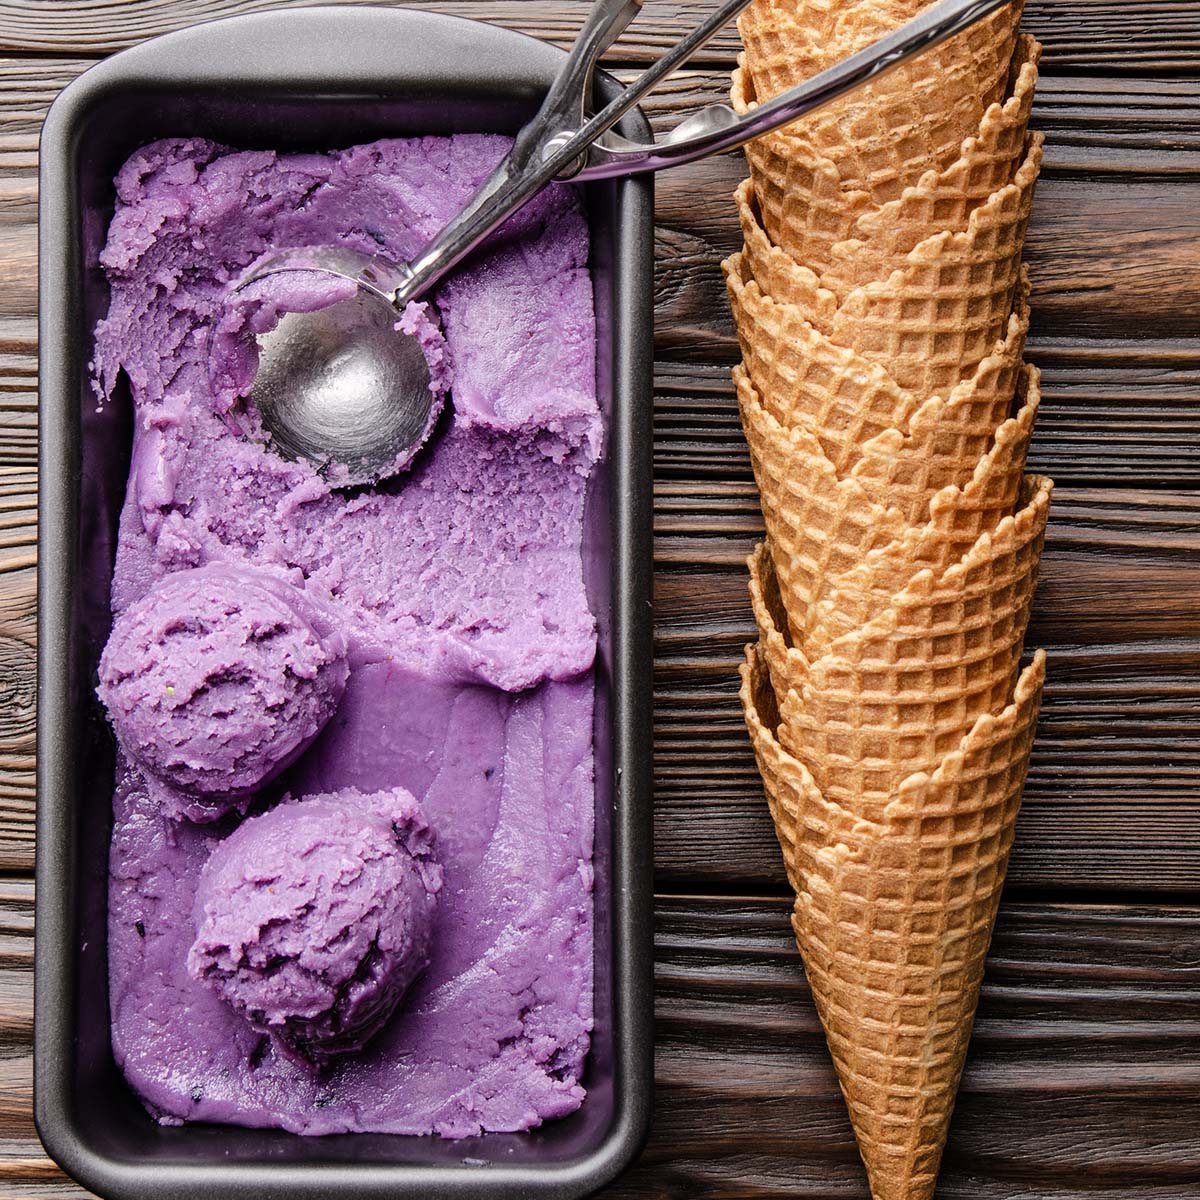 Yes, ice cream can get moldy even though it’s frozen, although some people find it hard to believe. When ice cream goes off, its texture changes, turning rather gooey.